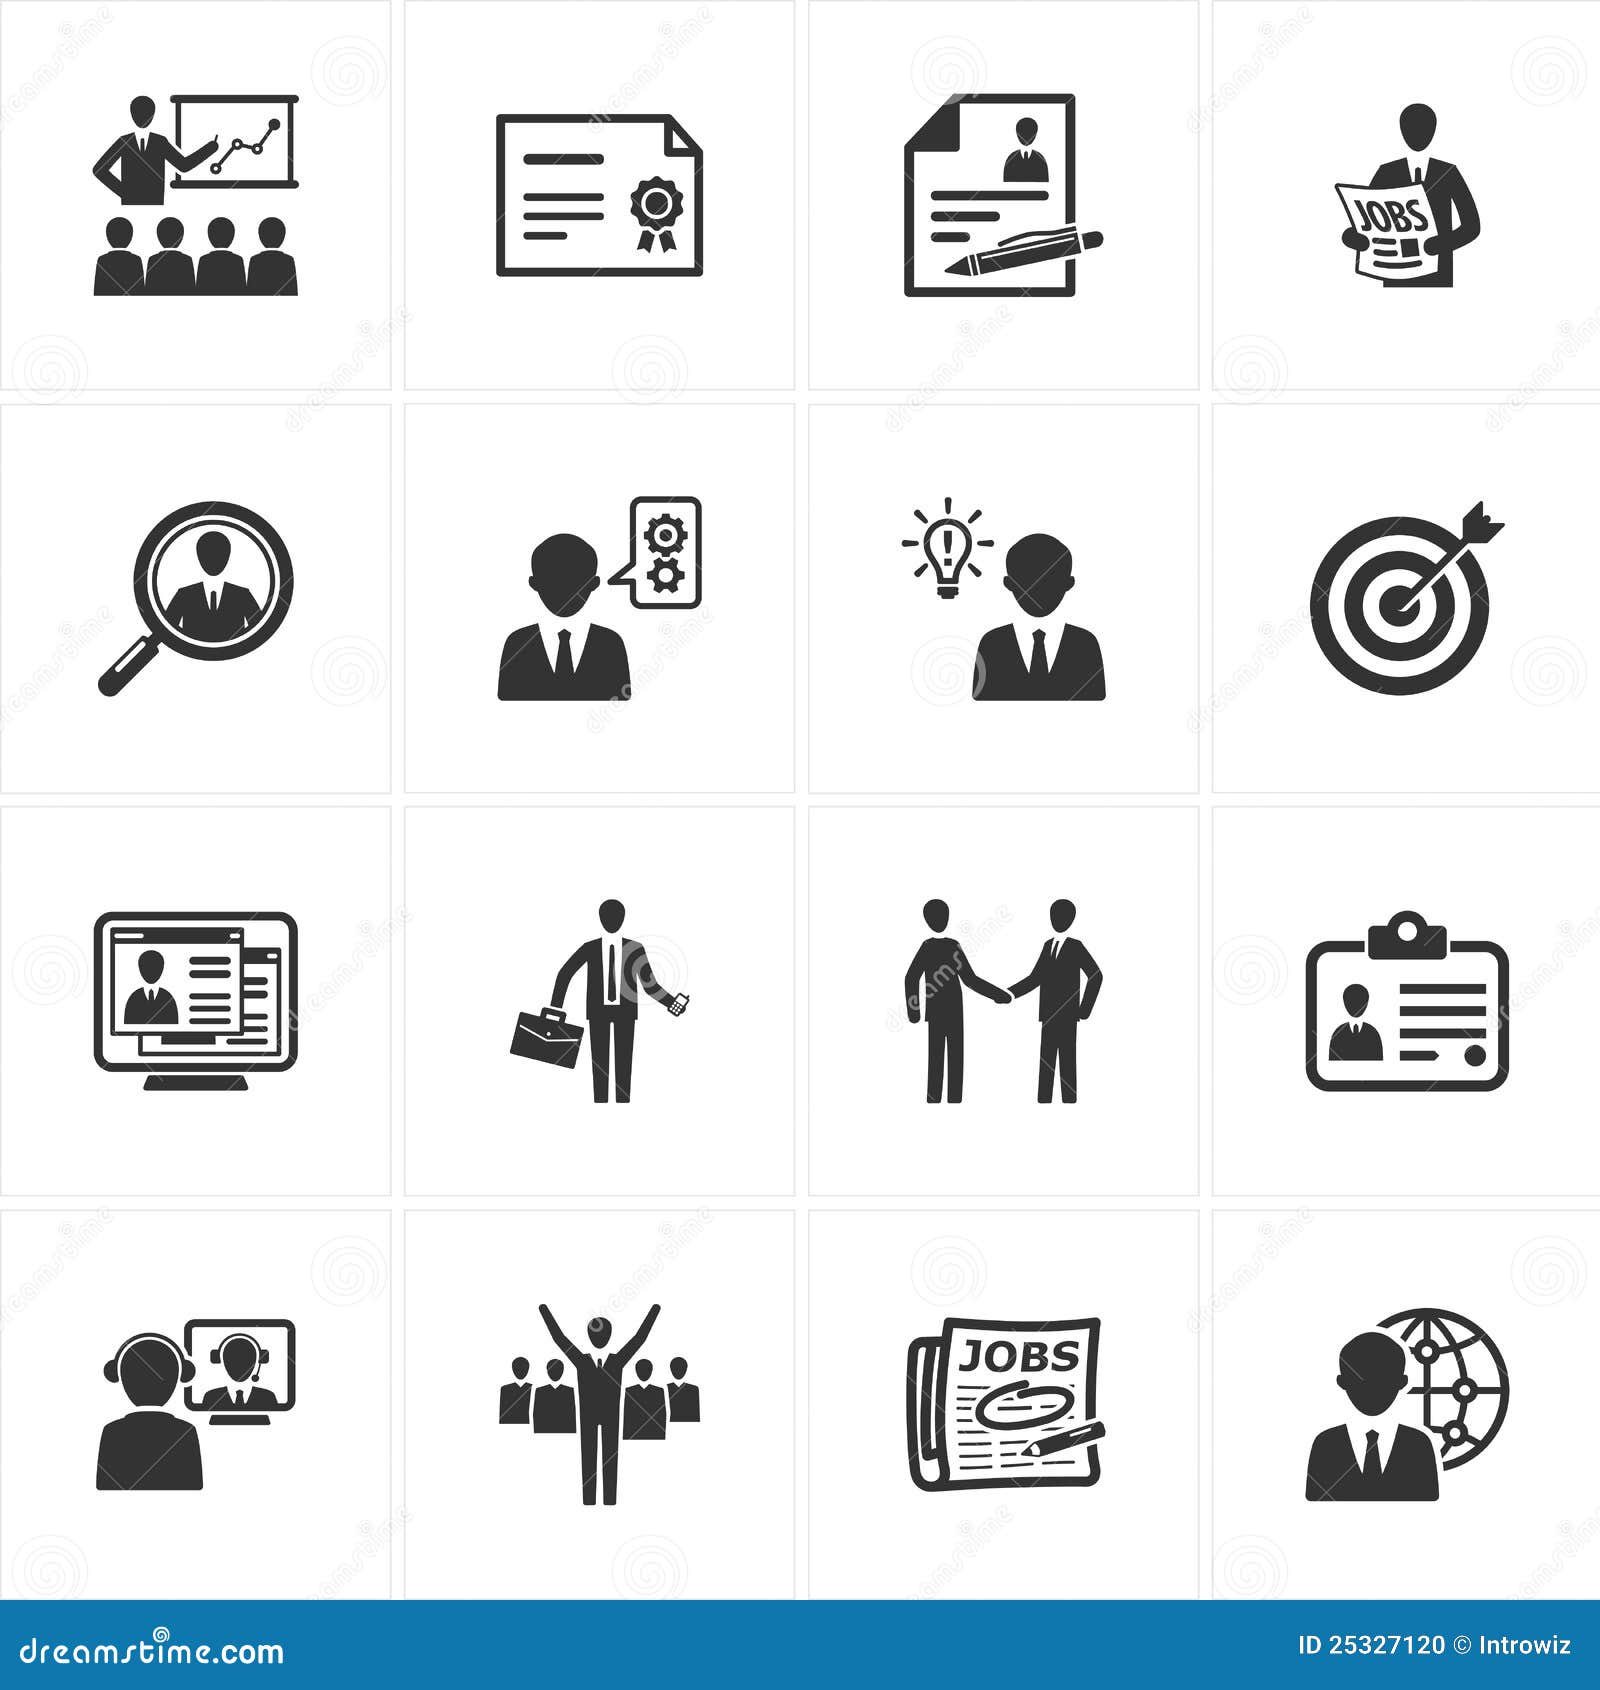 30 business creative vector icons in flat style for material